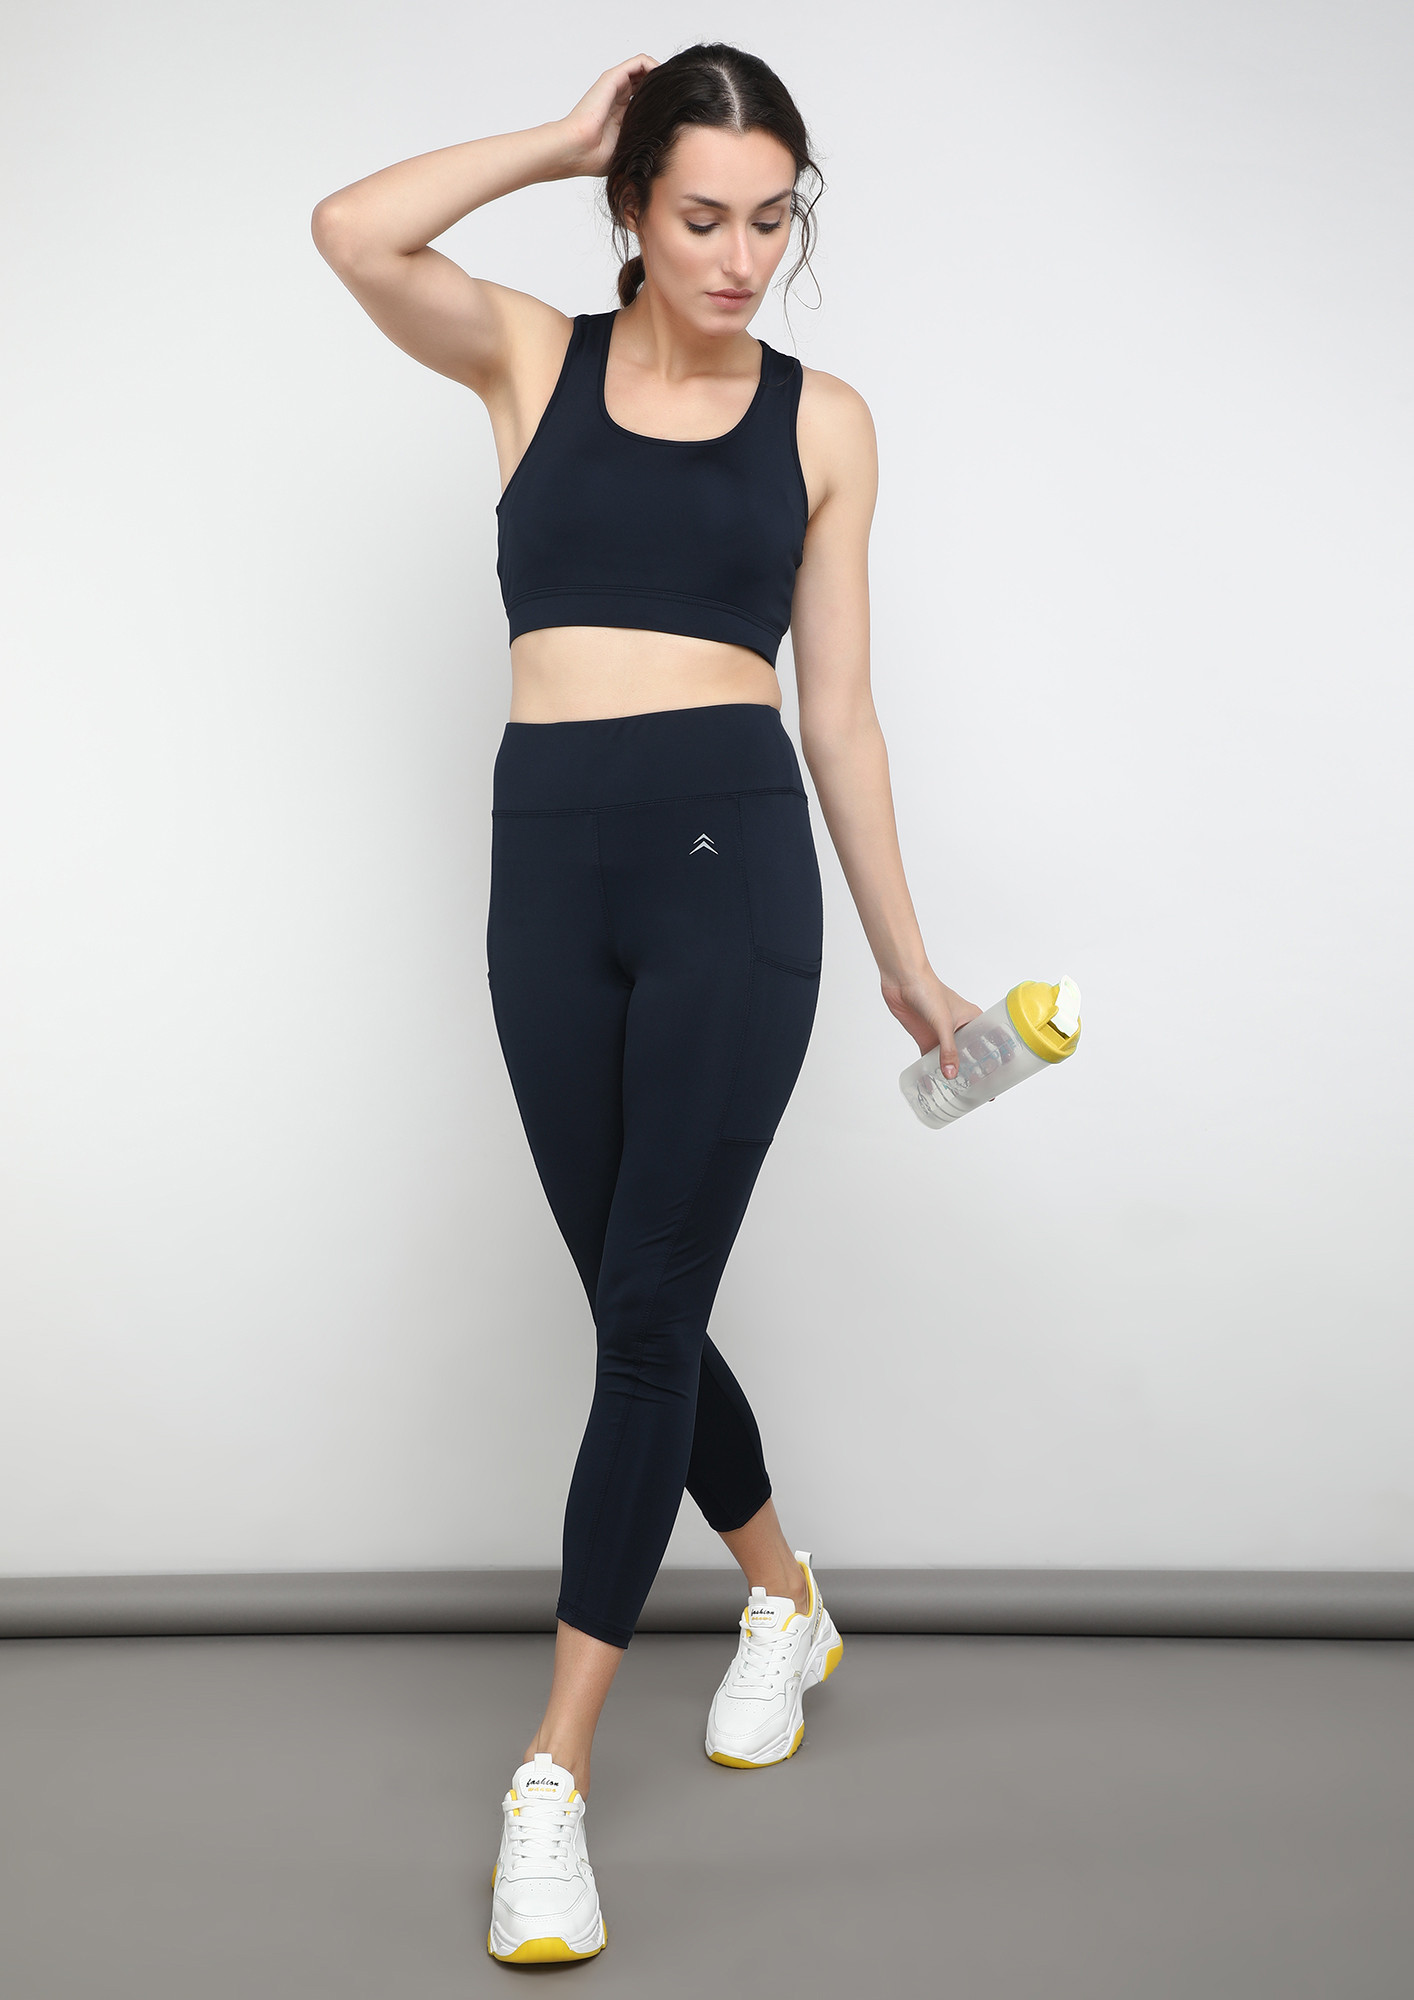 Women Sports Clothes Leggings - Buy Women Sports Clothes Leggings online in  India